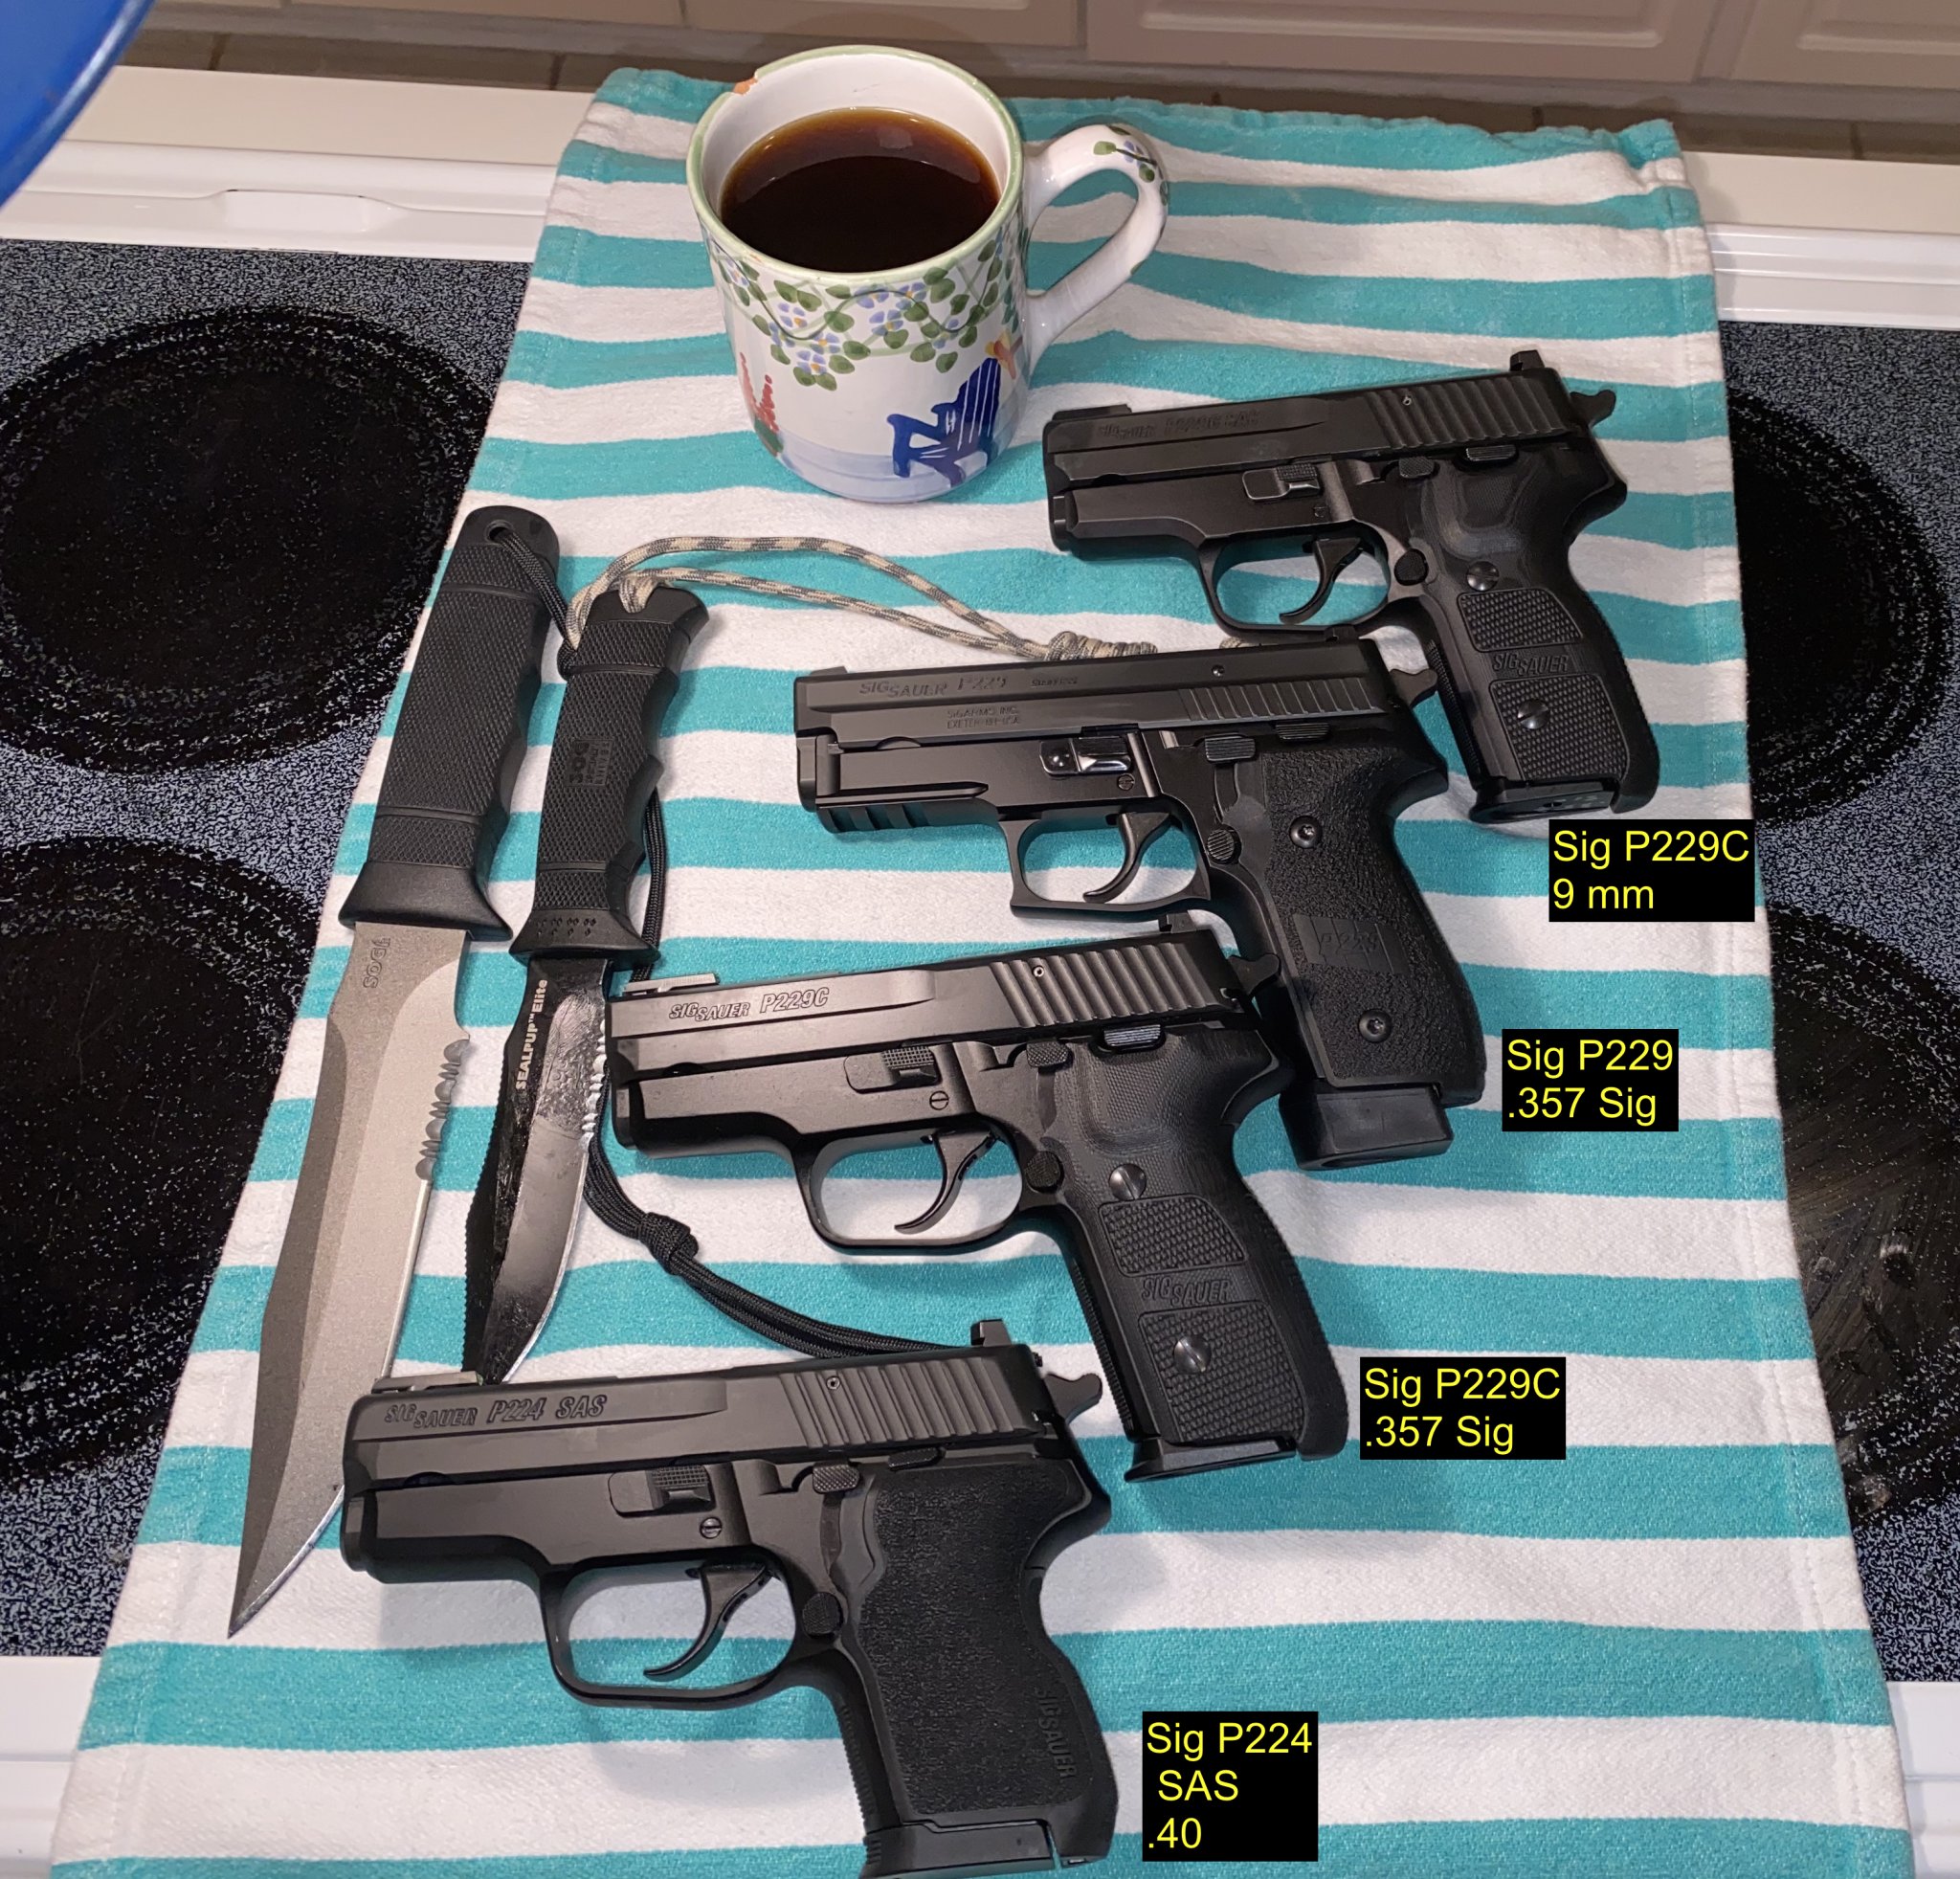 HK p30 VP9 Compact - USP .45 Tactical  Sig P229 Derivatives with Coffee Photos 2020IMG_7193 copy.jpg